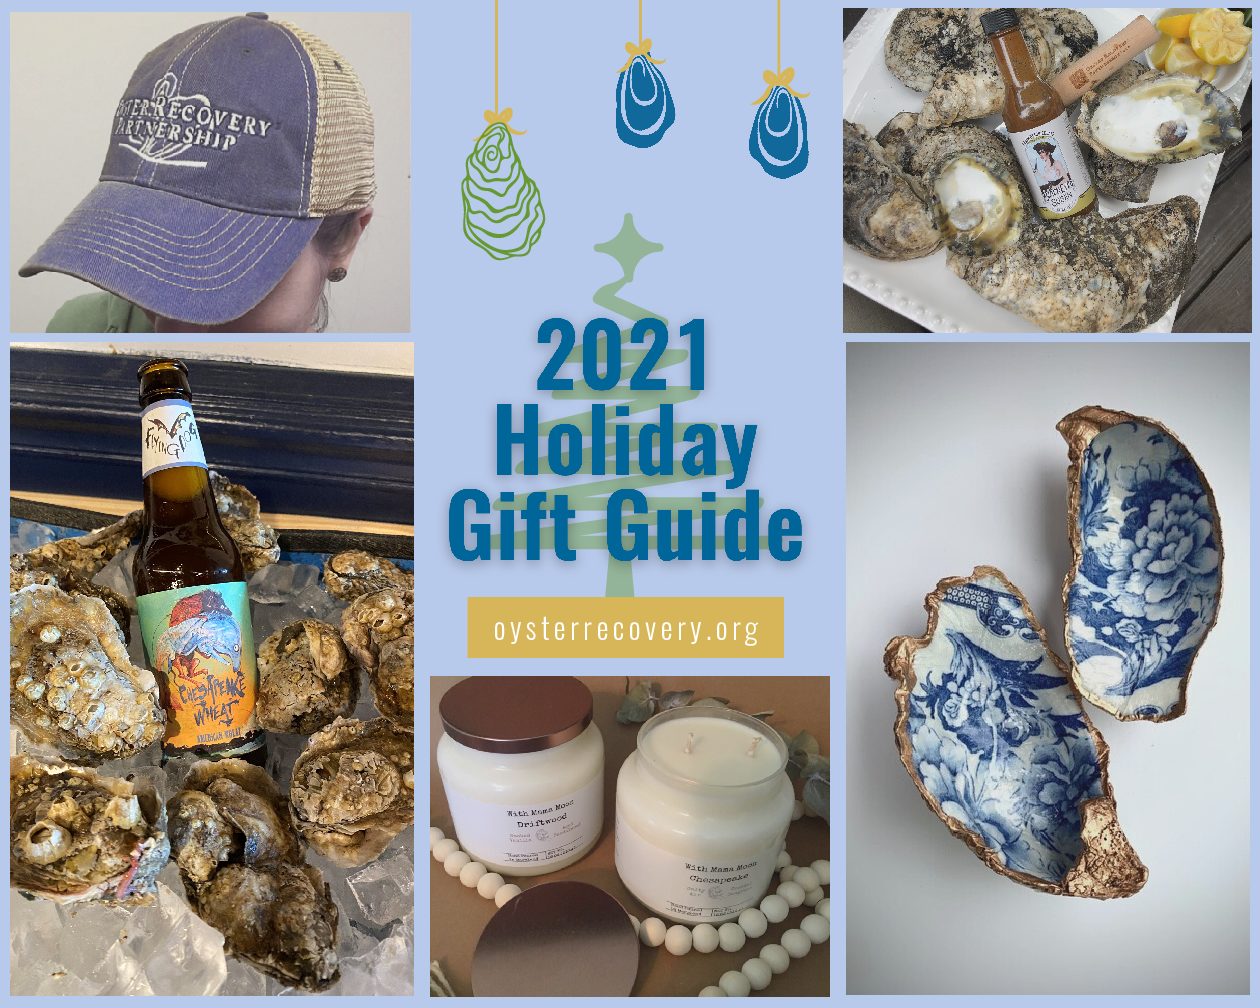 2021 Holiday Gift Guide (5)